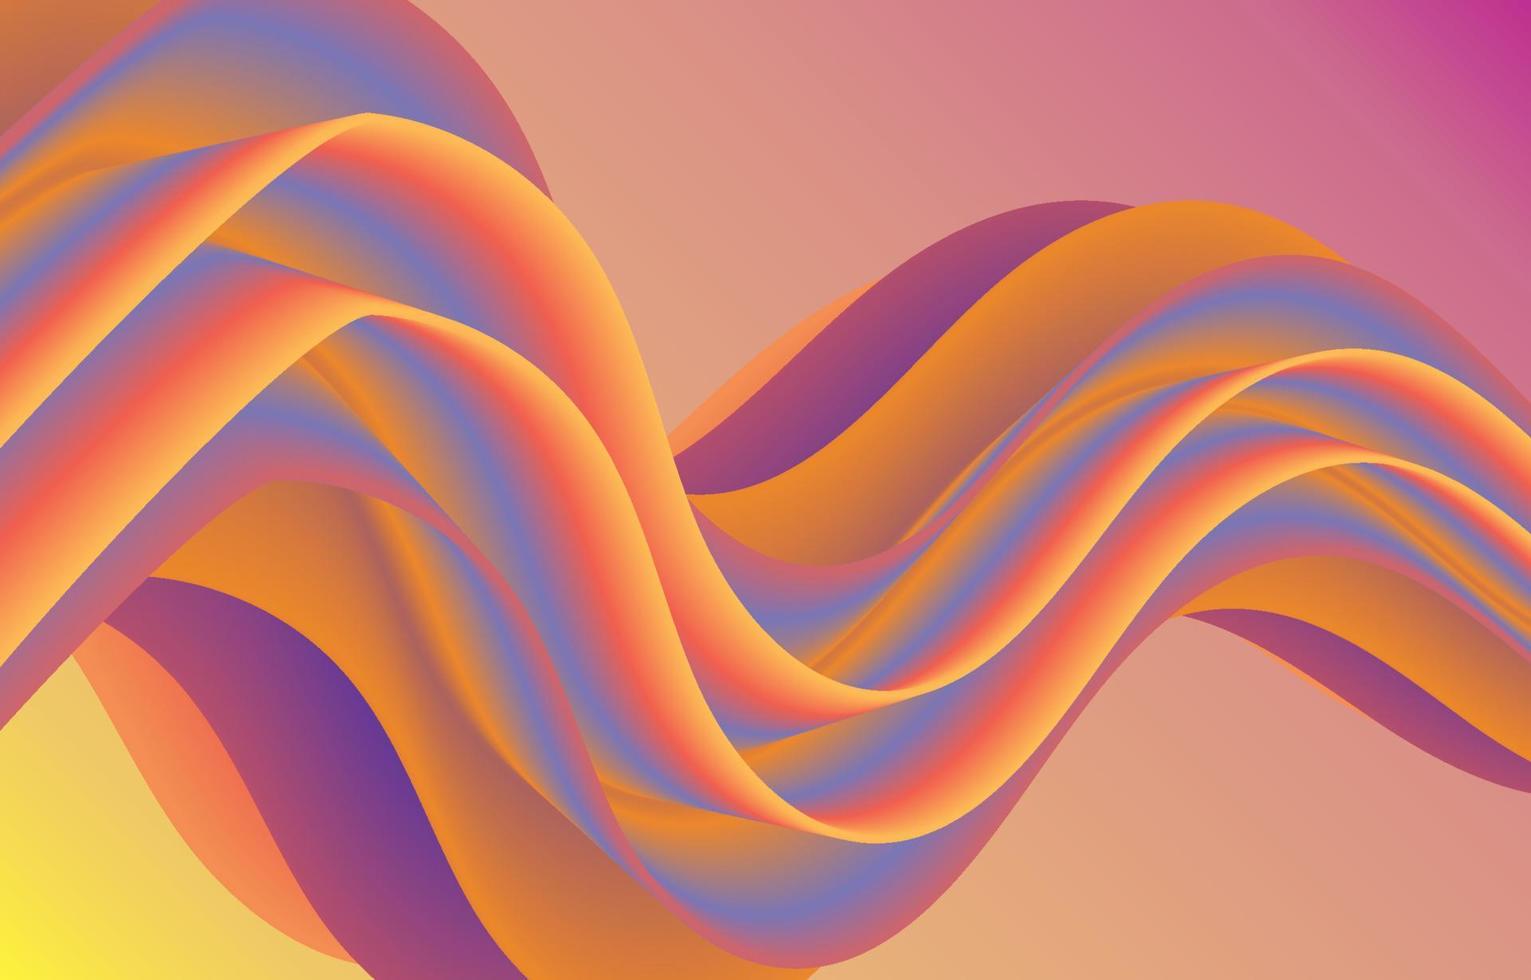 abstract colorful motion fluid wave background vector